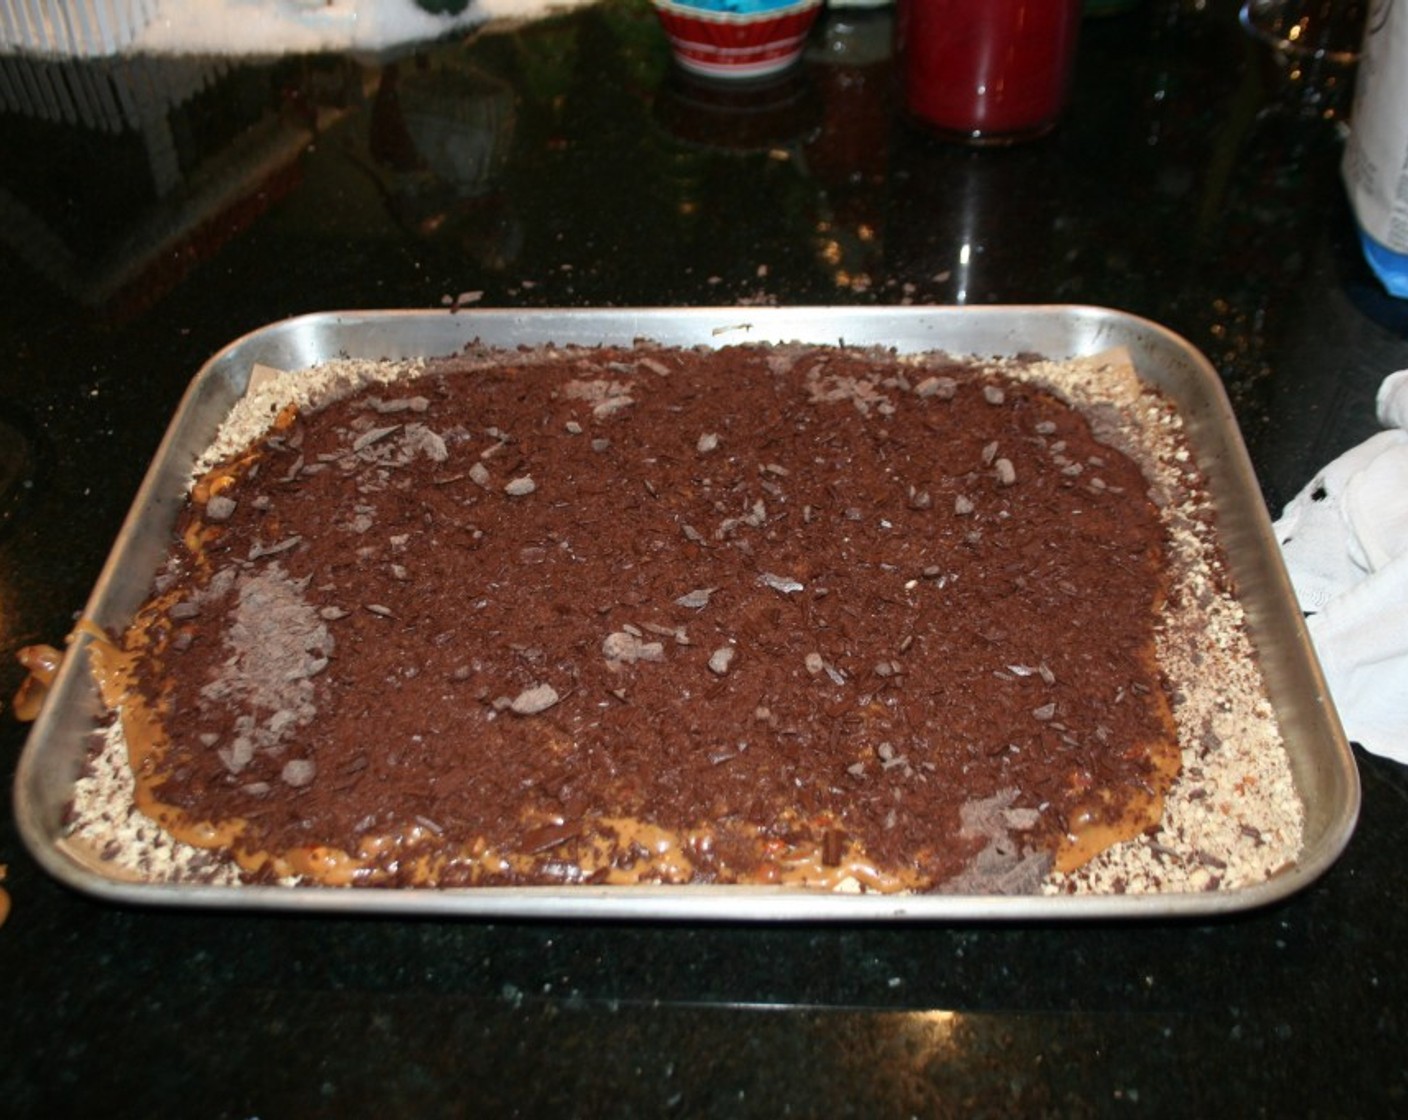 step 7 Then sprinkle with the Chocolate (2 cups) on top and spread with an offset spatula to smooth it out and sprinkle with a little more of the almond meal. I place it in the refrigerator for 30 minutes. Remove and break up into pieces.